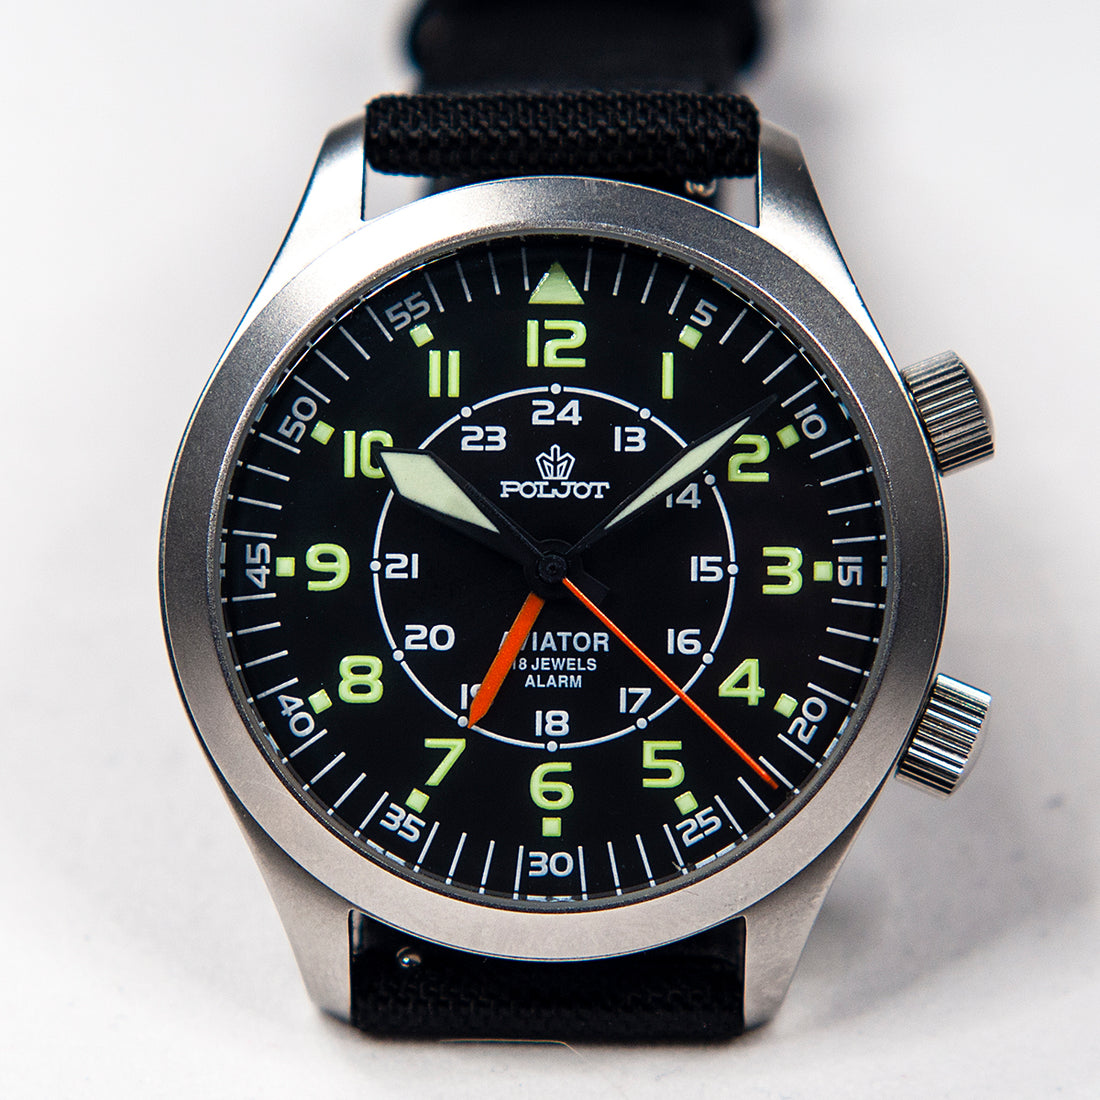 The Poljot Aviator Alarm Watch Review, and Why Every Budget Watch Enthusiast Should Own One